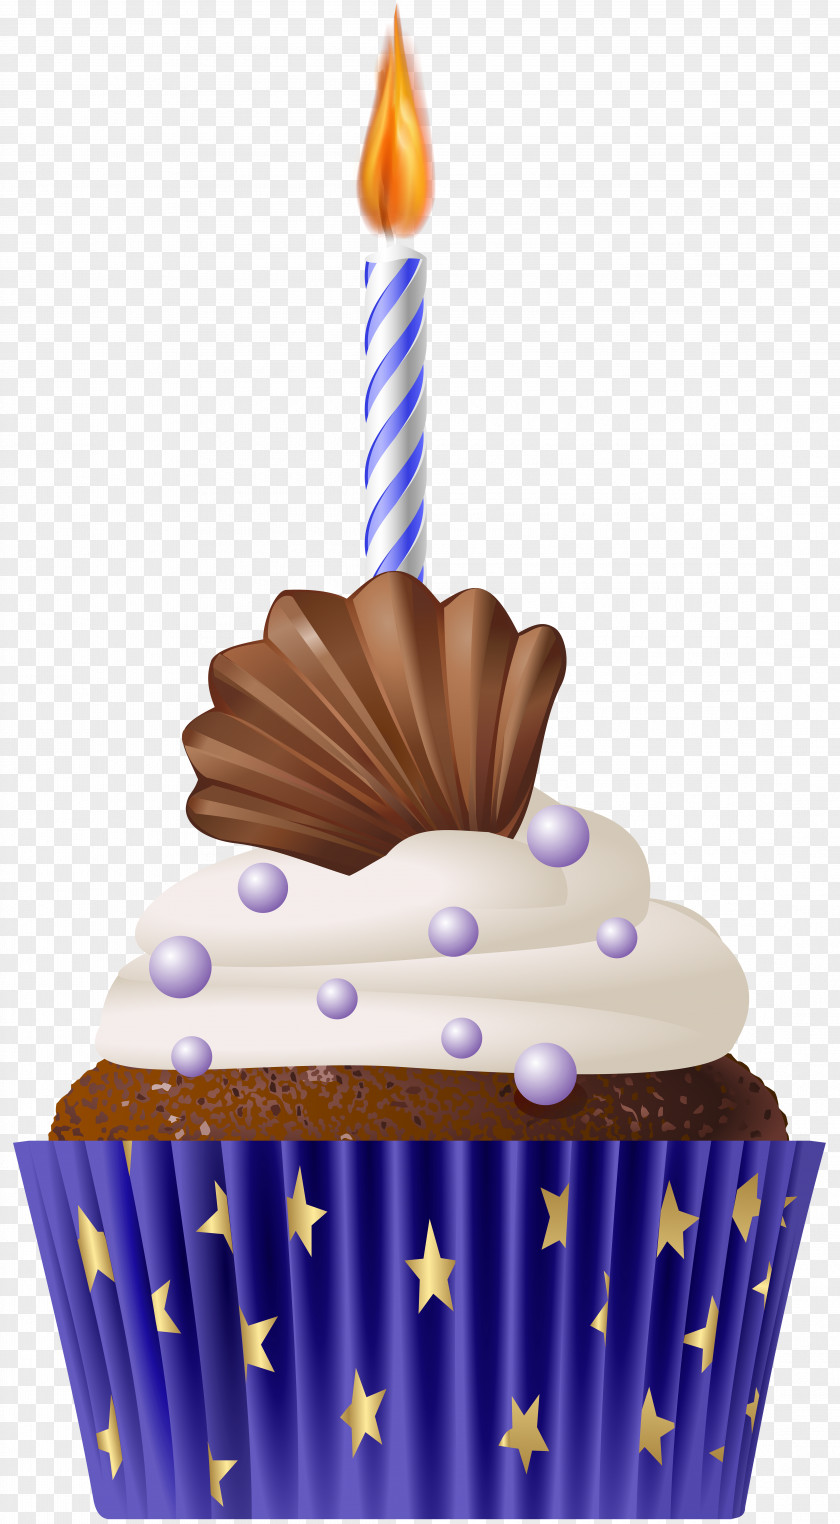 Candle Birthday Cake Cupcake Muffin Clip Art PNG